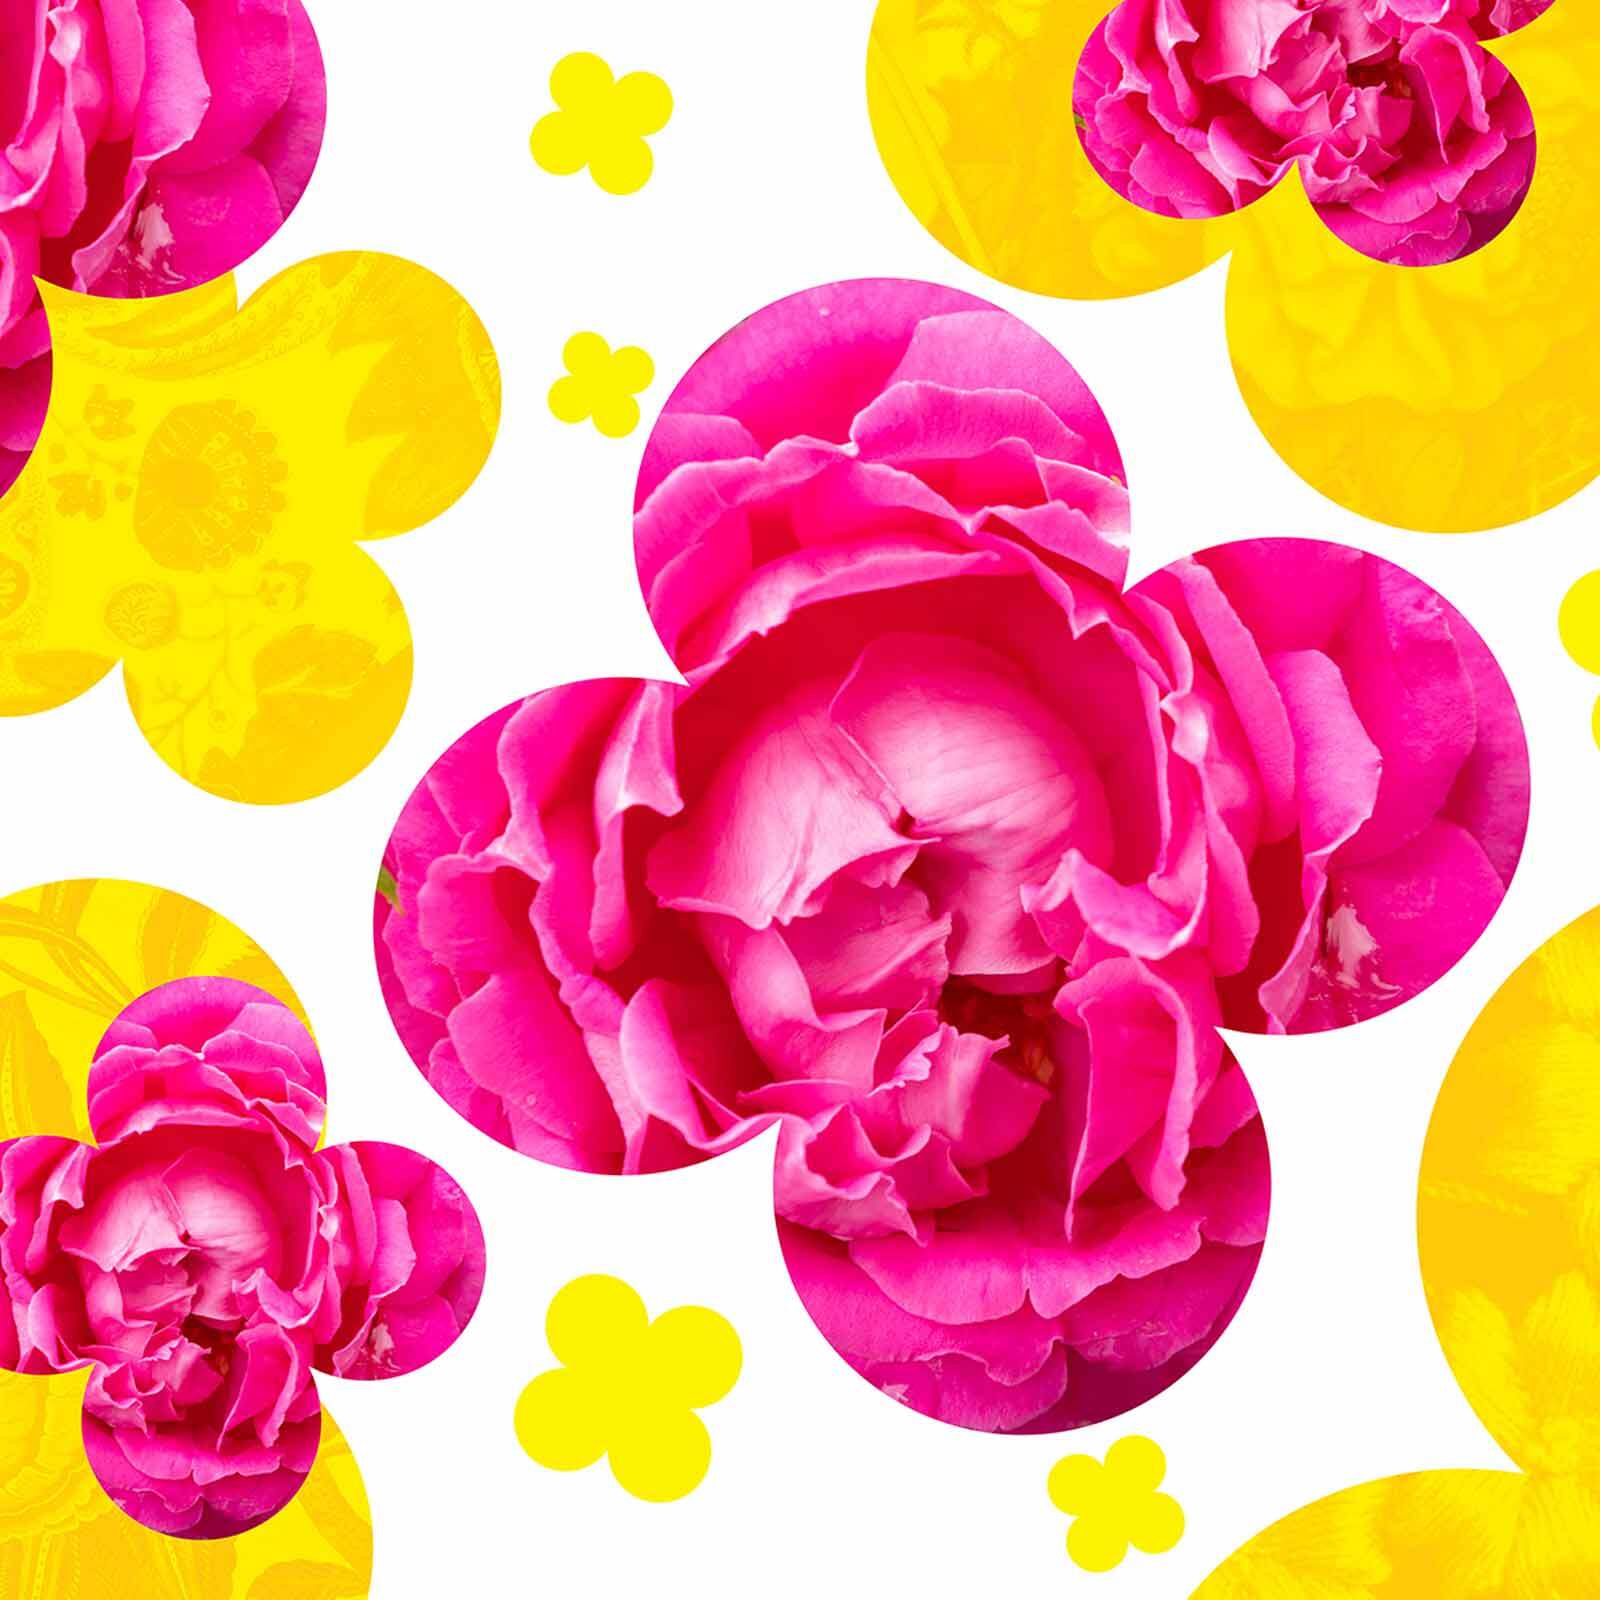 Eye-catching pink and yellow flower design, featuring standout rose blossoms.